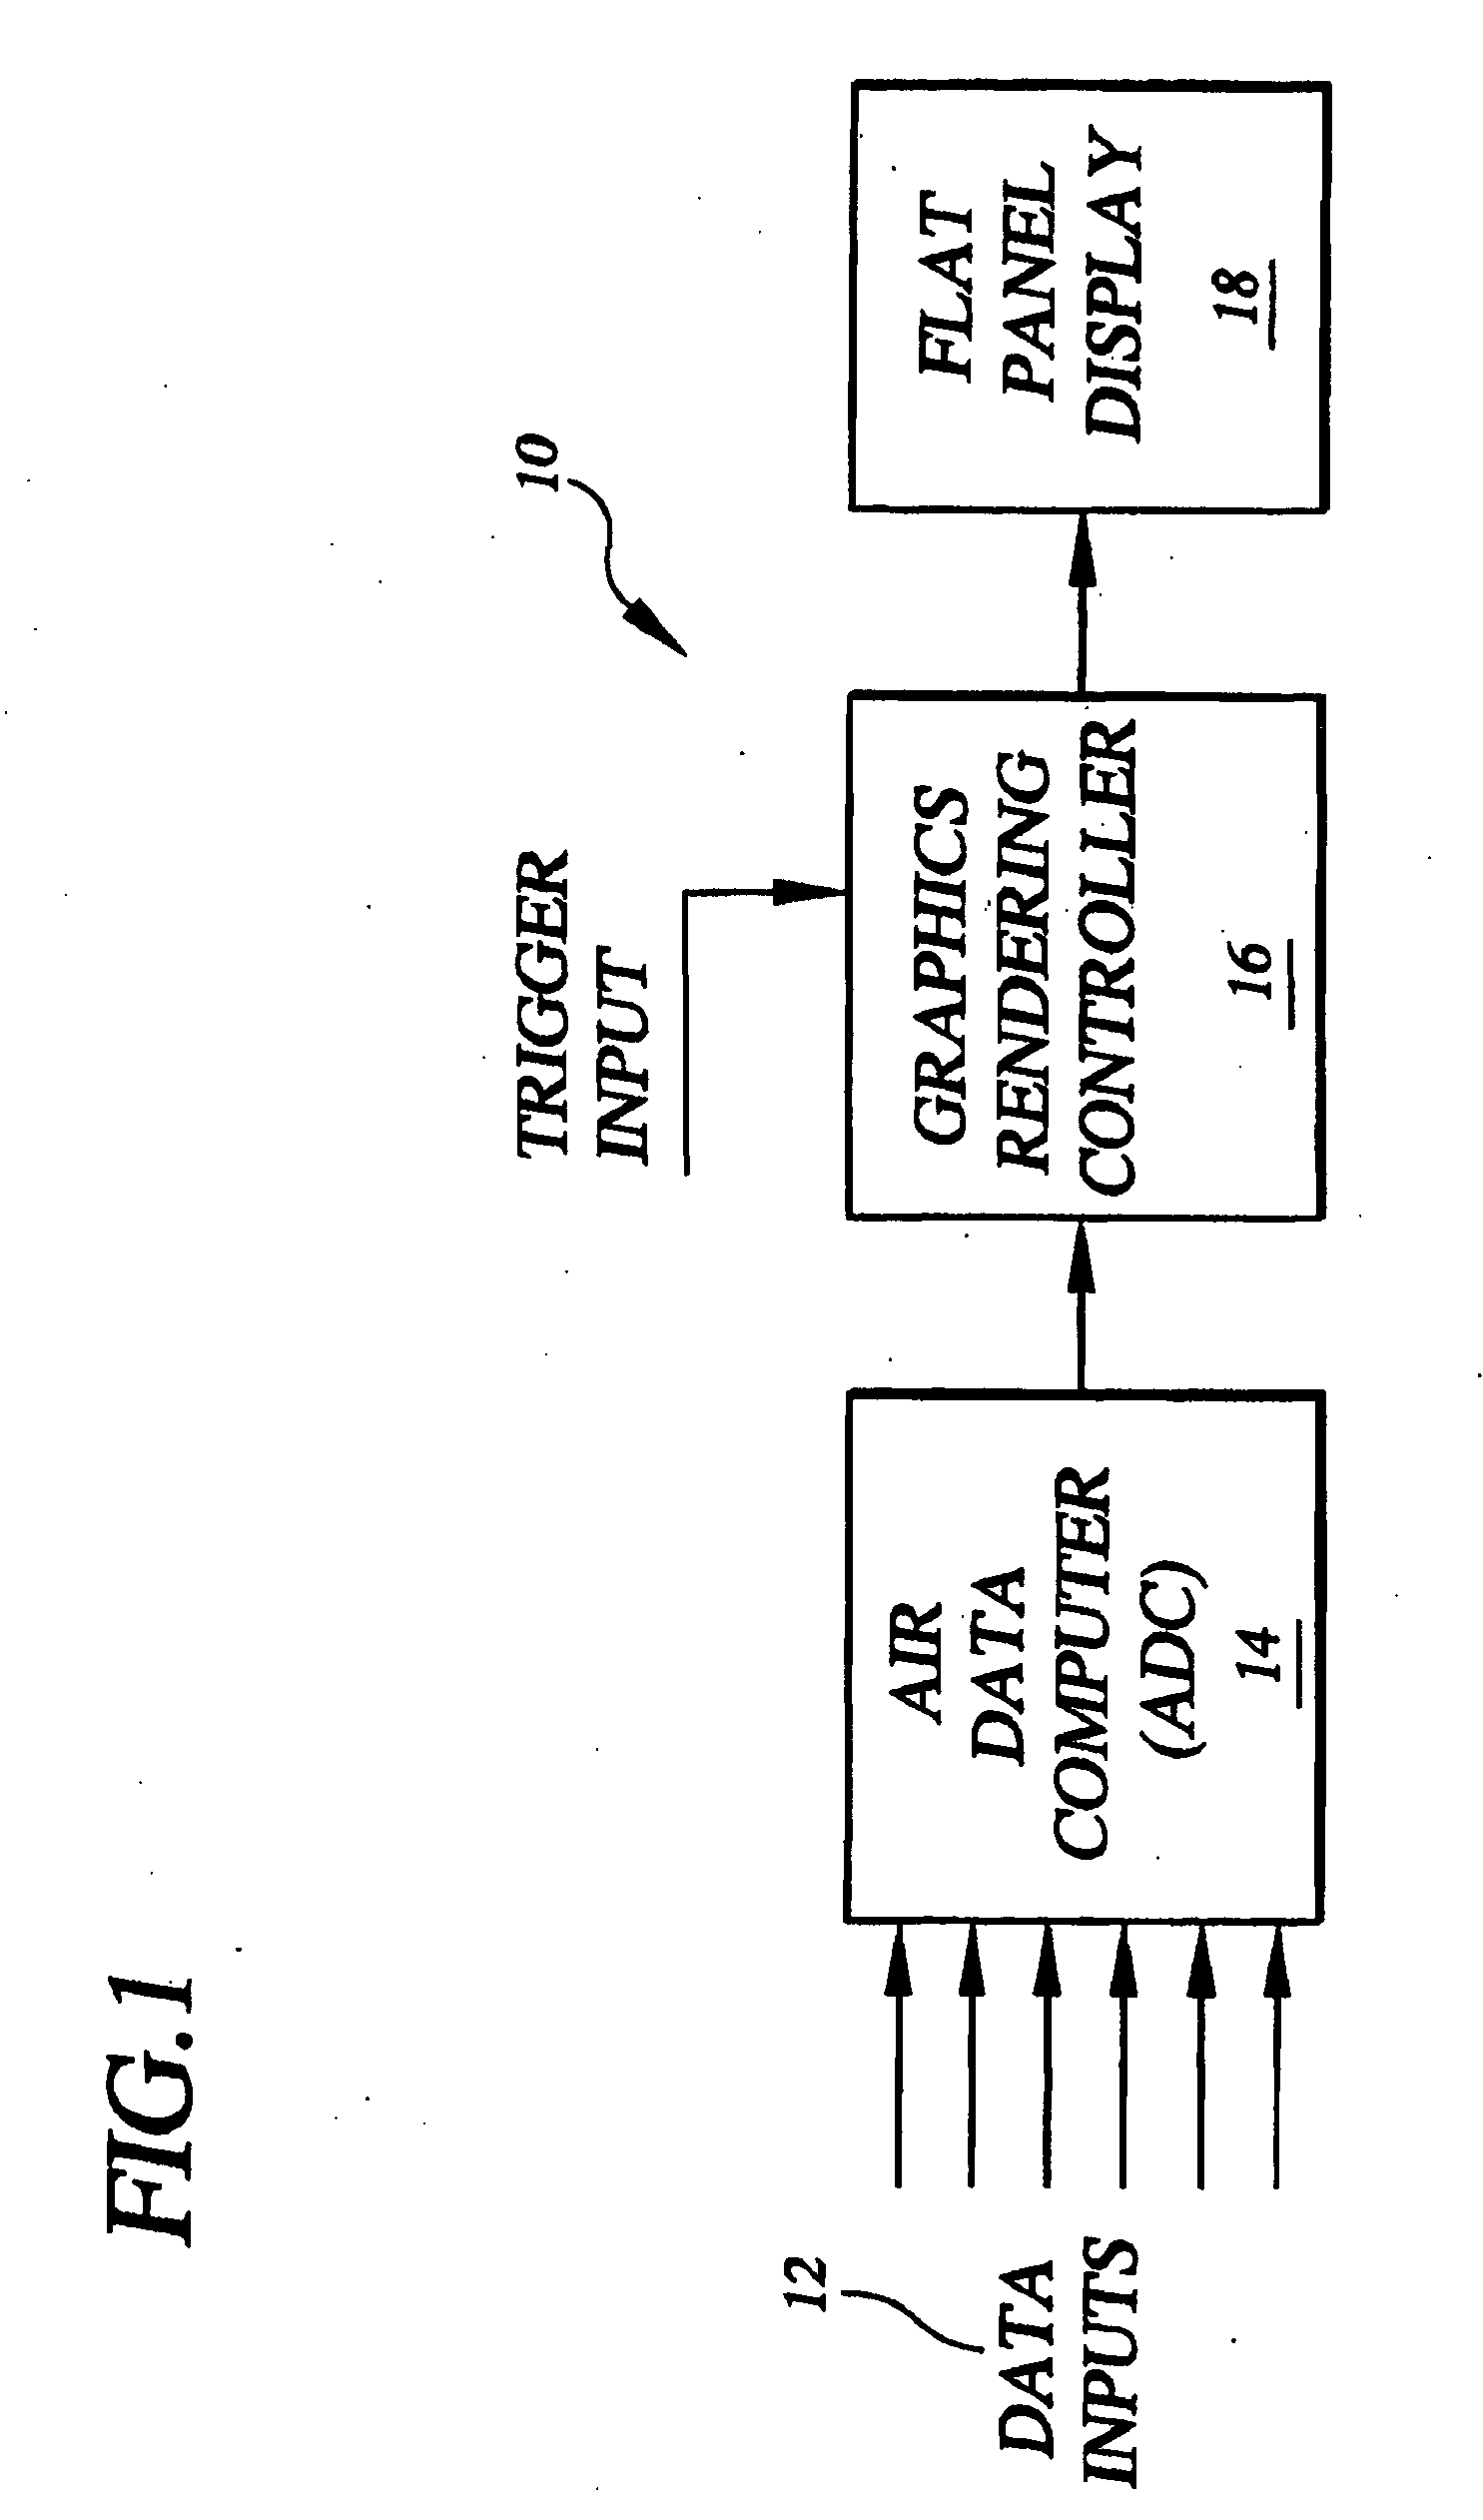 Method of system for verifying entry of manually adjustable data in a multi-parameter aircraft instrument display